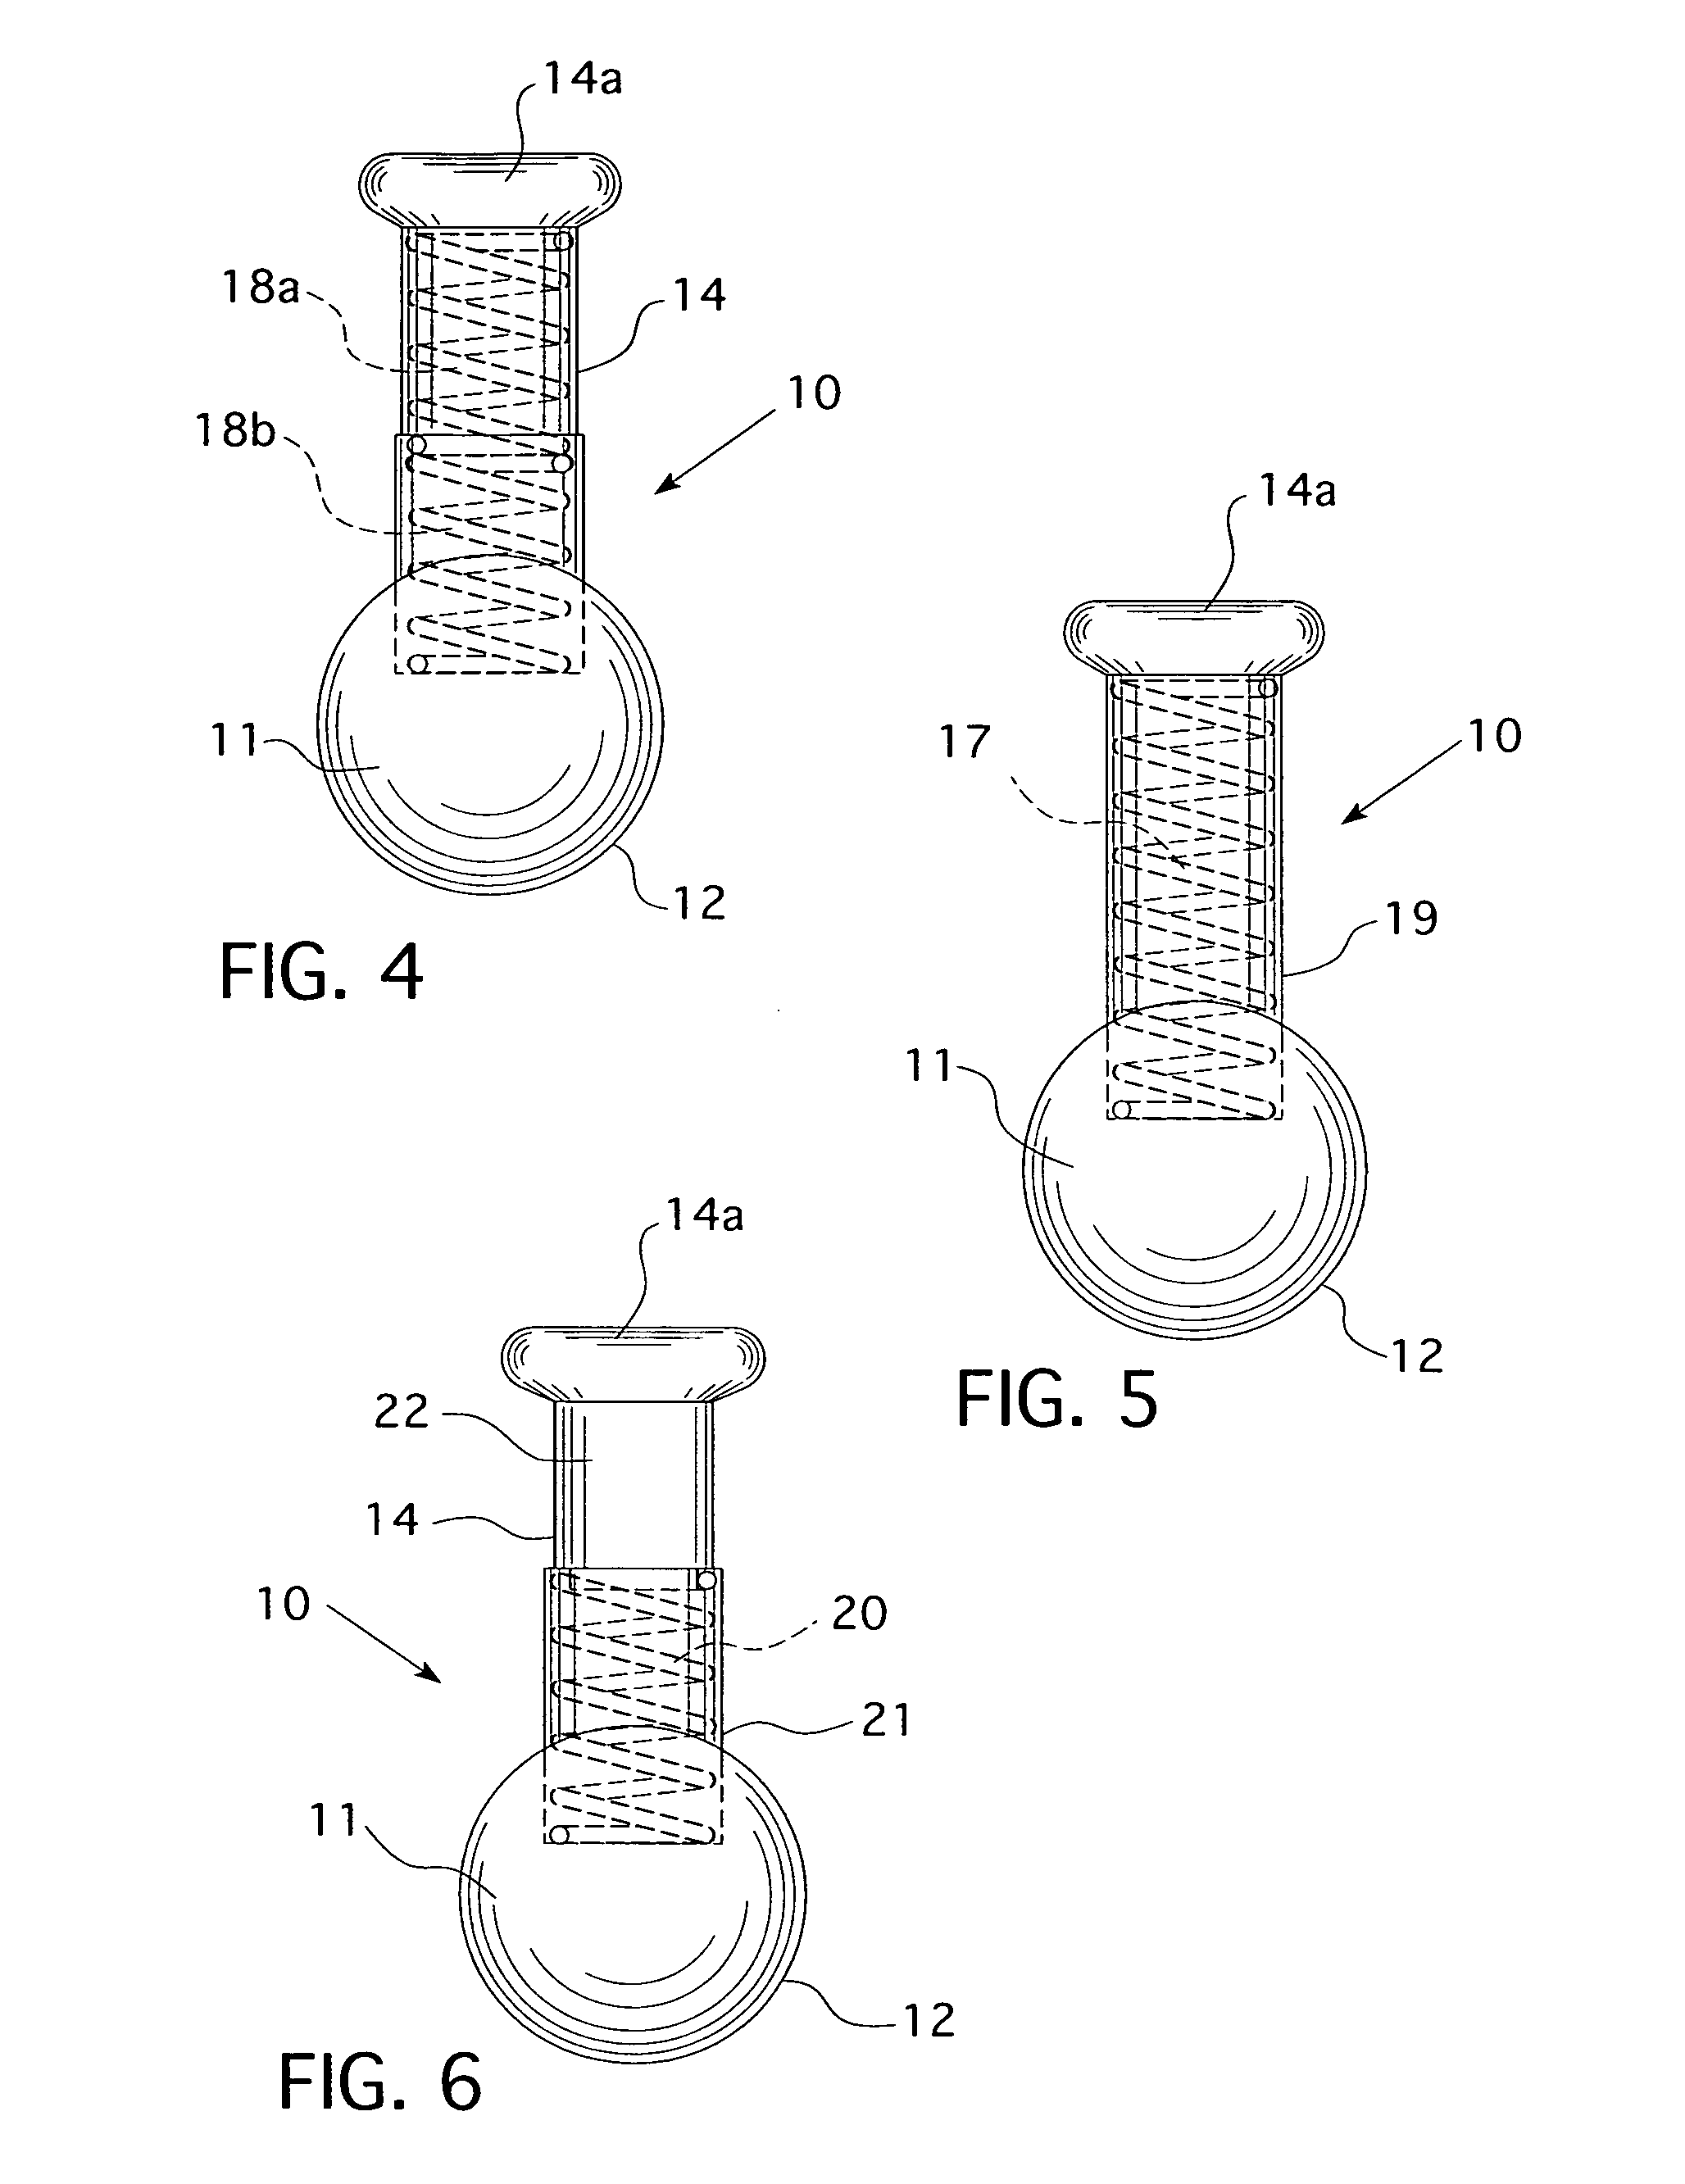 In ear communications device and stabilizer